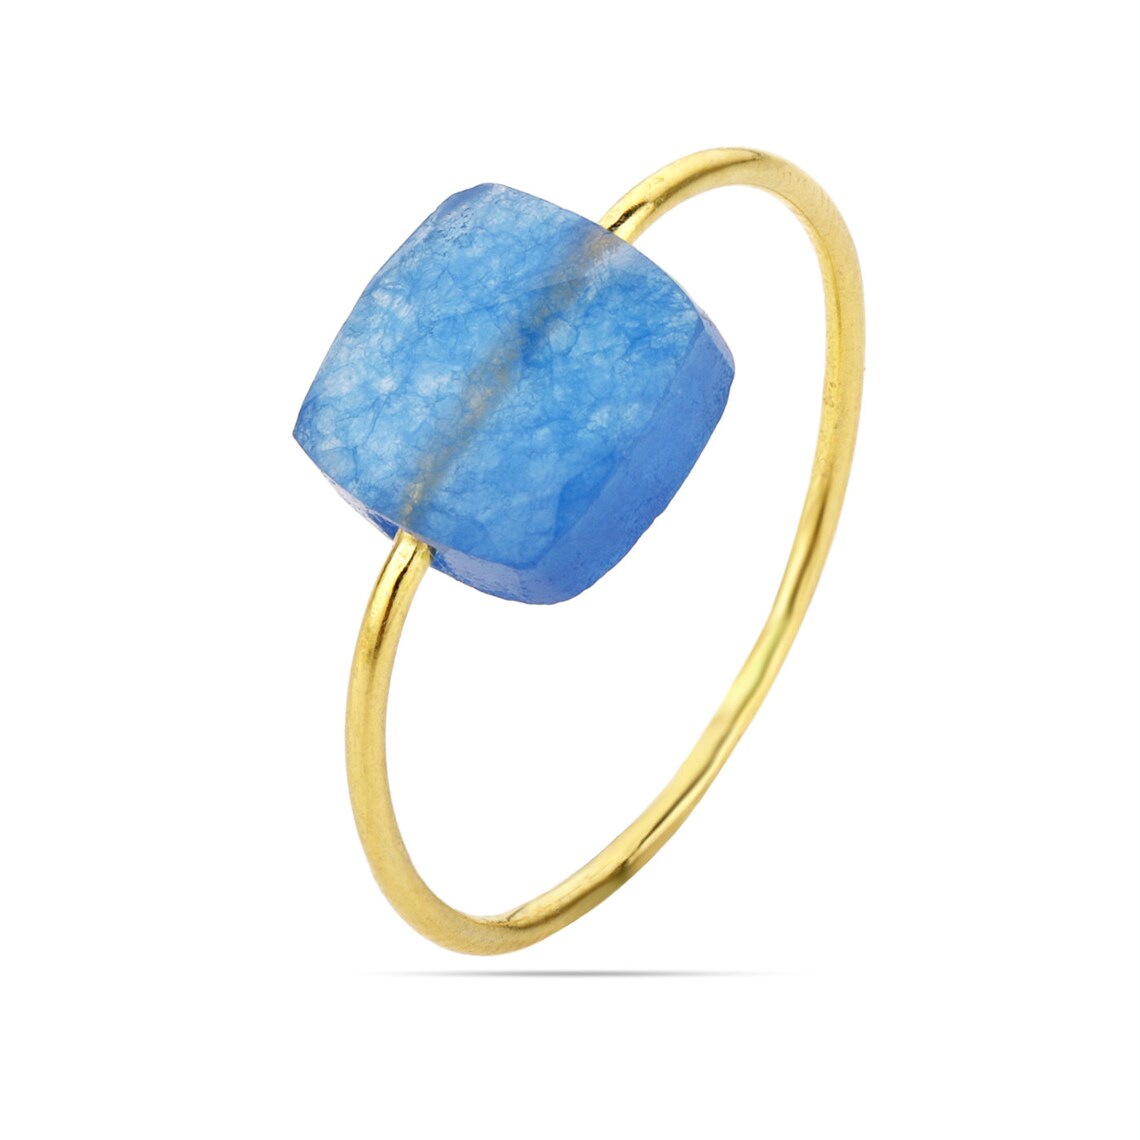 Bezel Ring in Sterling Silver with Blue Quartz Stone - Handmade - Gold Plated